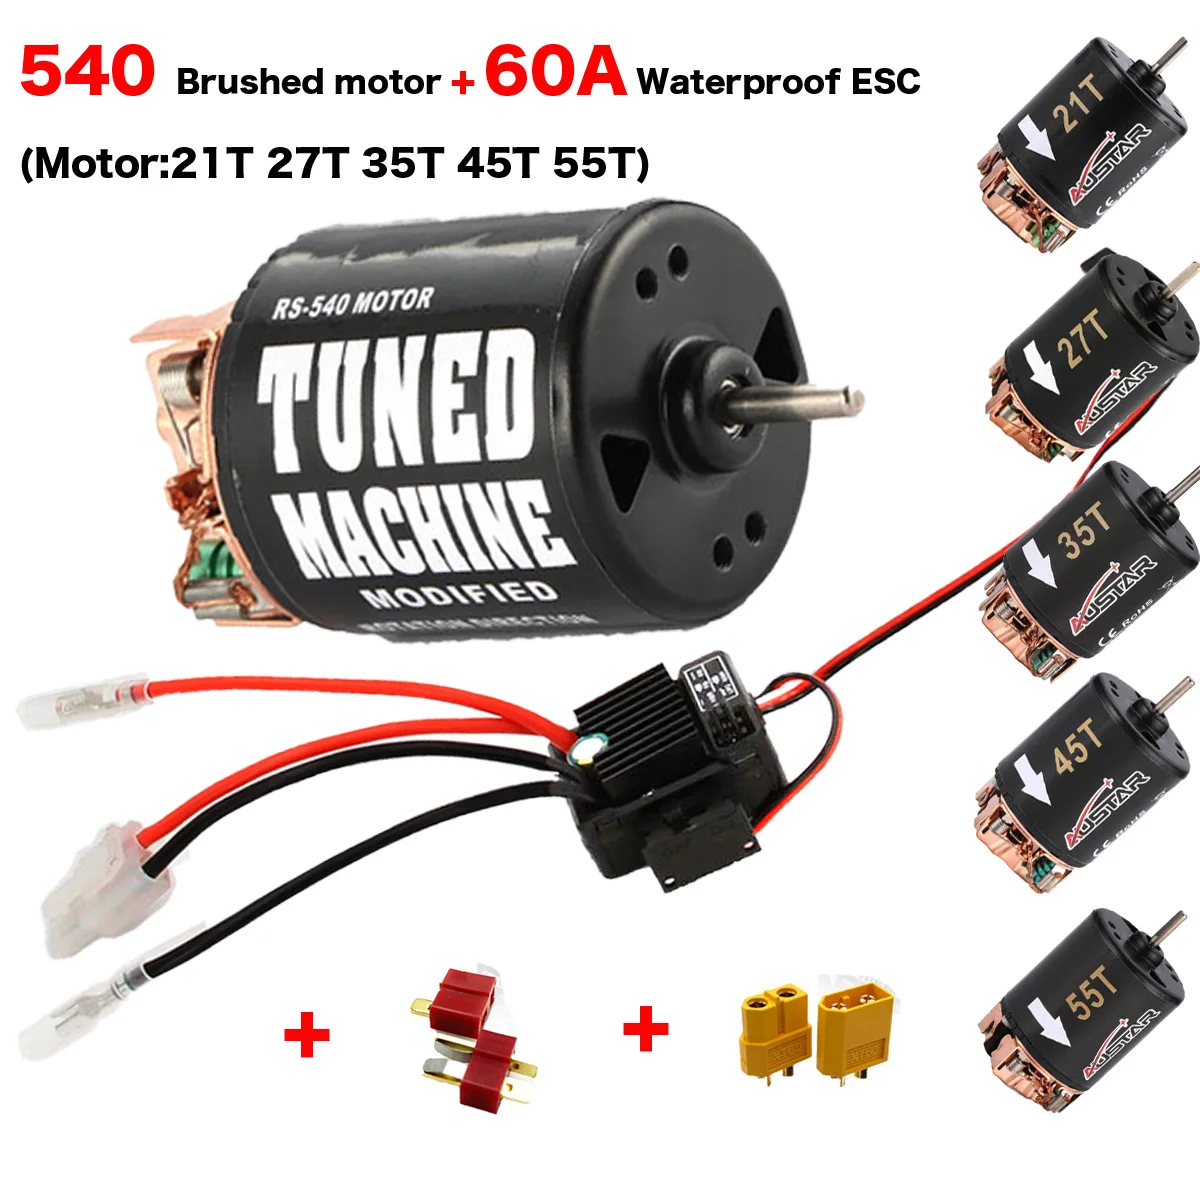 

RC 540 motor 21T 27T 35T 45T 55T Brushed Motor With XT60 T plug WP-1060-RTR 60A Waterproof ESC for 1/10 Rock Crawler Climbingcar